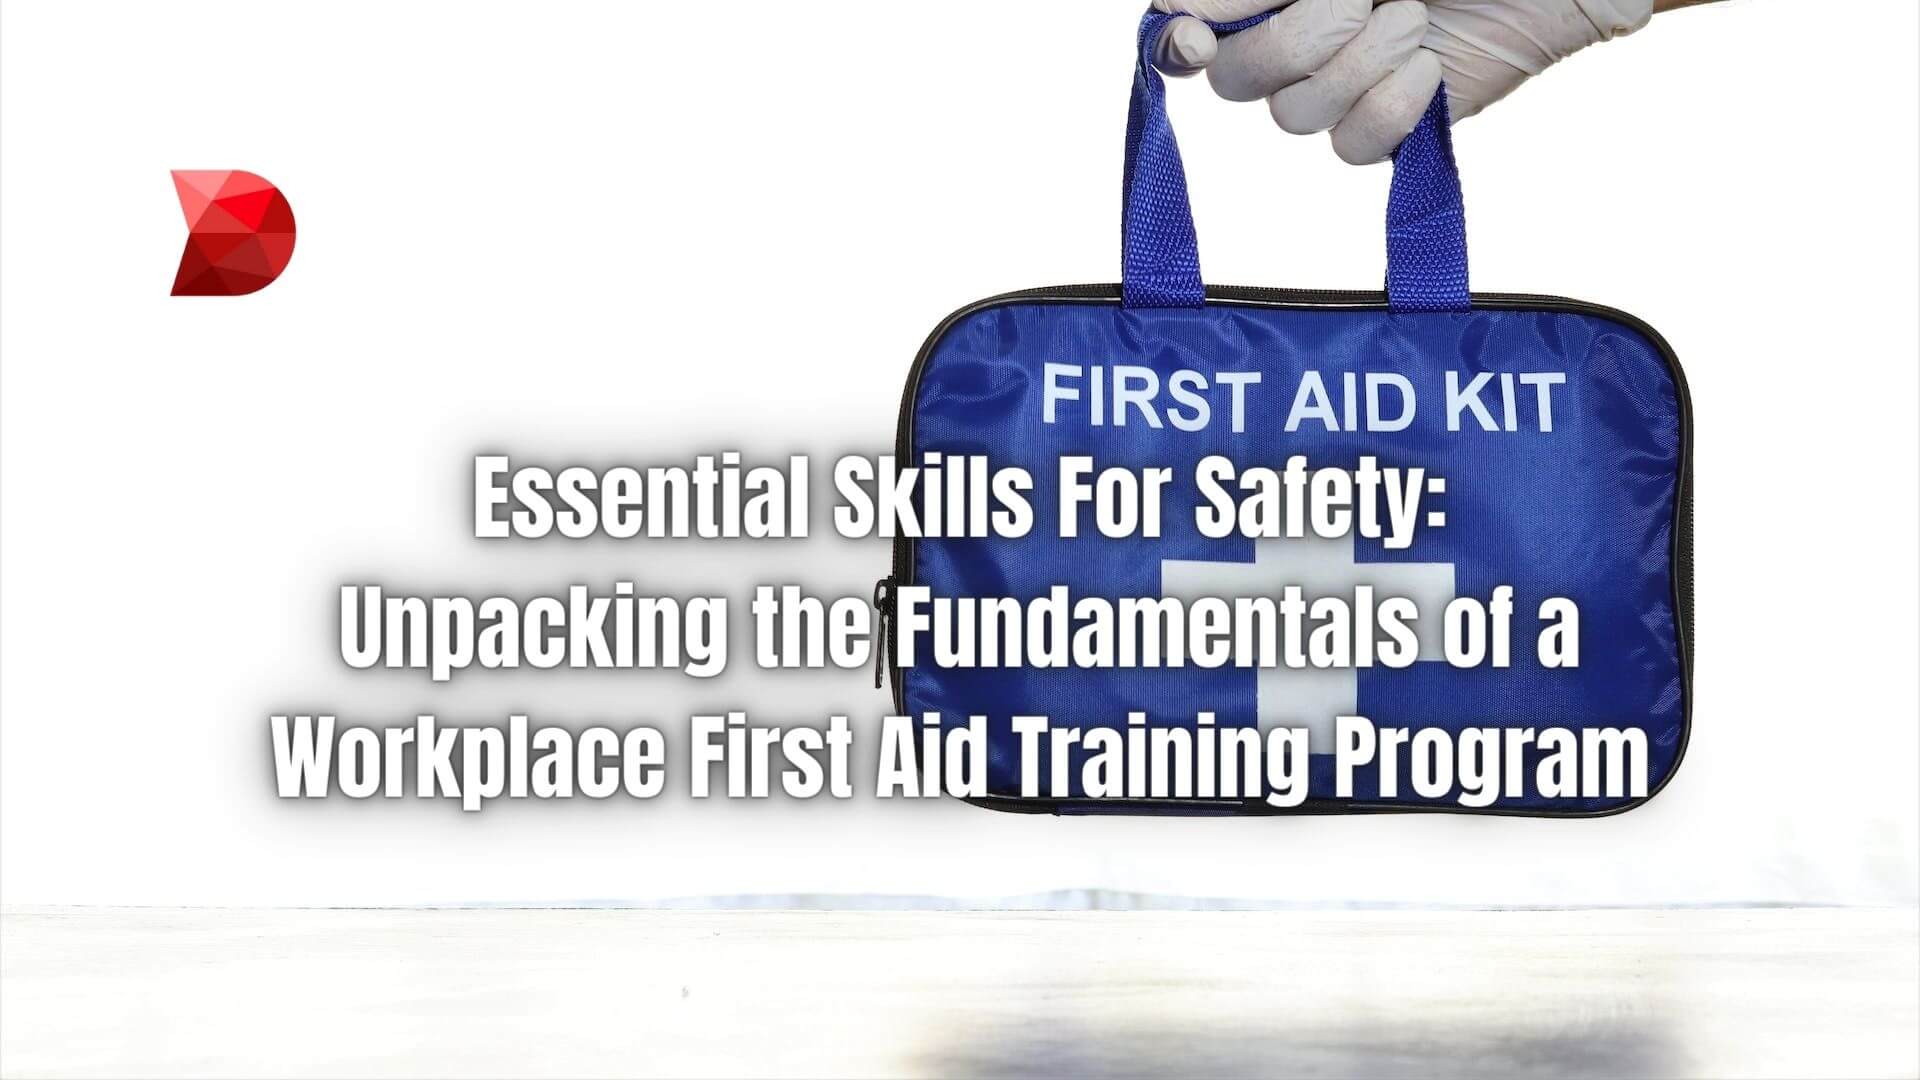 Discover essential workplace first aid training in this comprehensive guide. Click here to equip your team for safety and preparedness today!